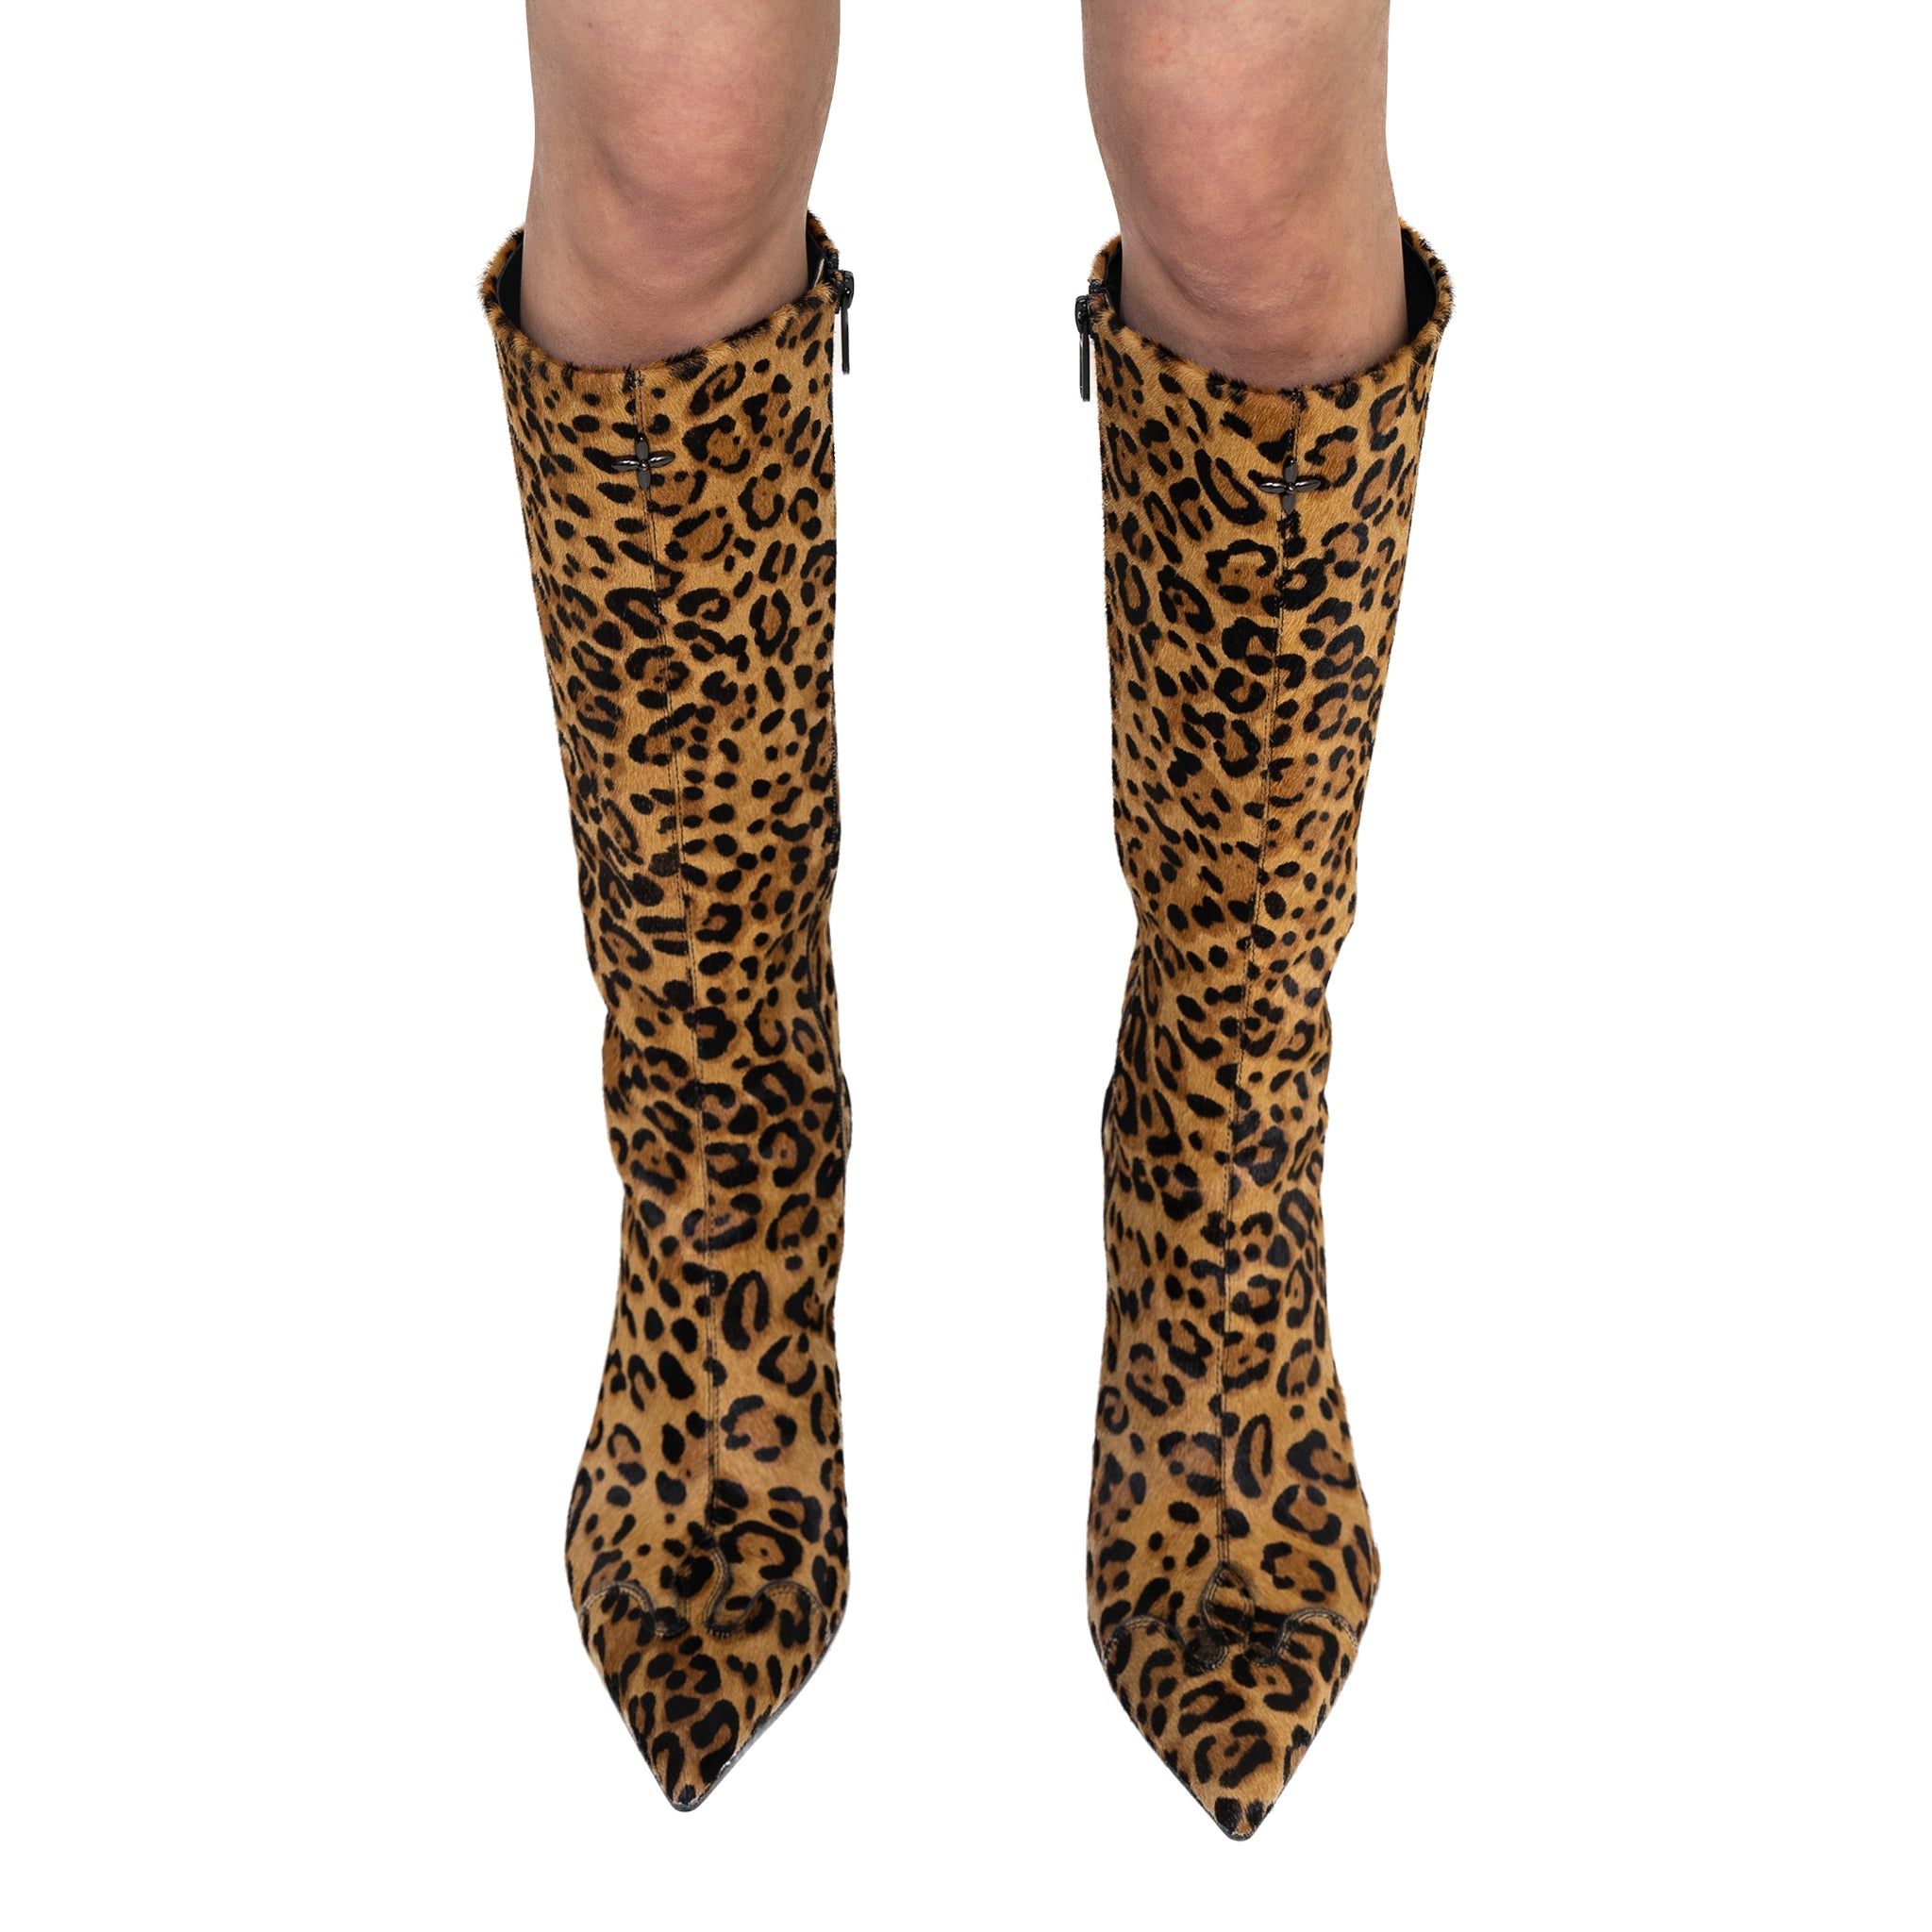 SMFK Leopard Compass Vintage Cowhide High-Boots | MADA IN CHINA